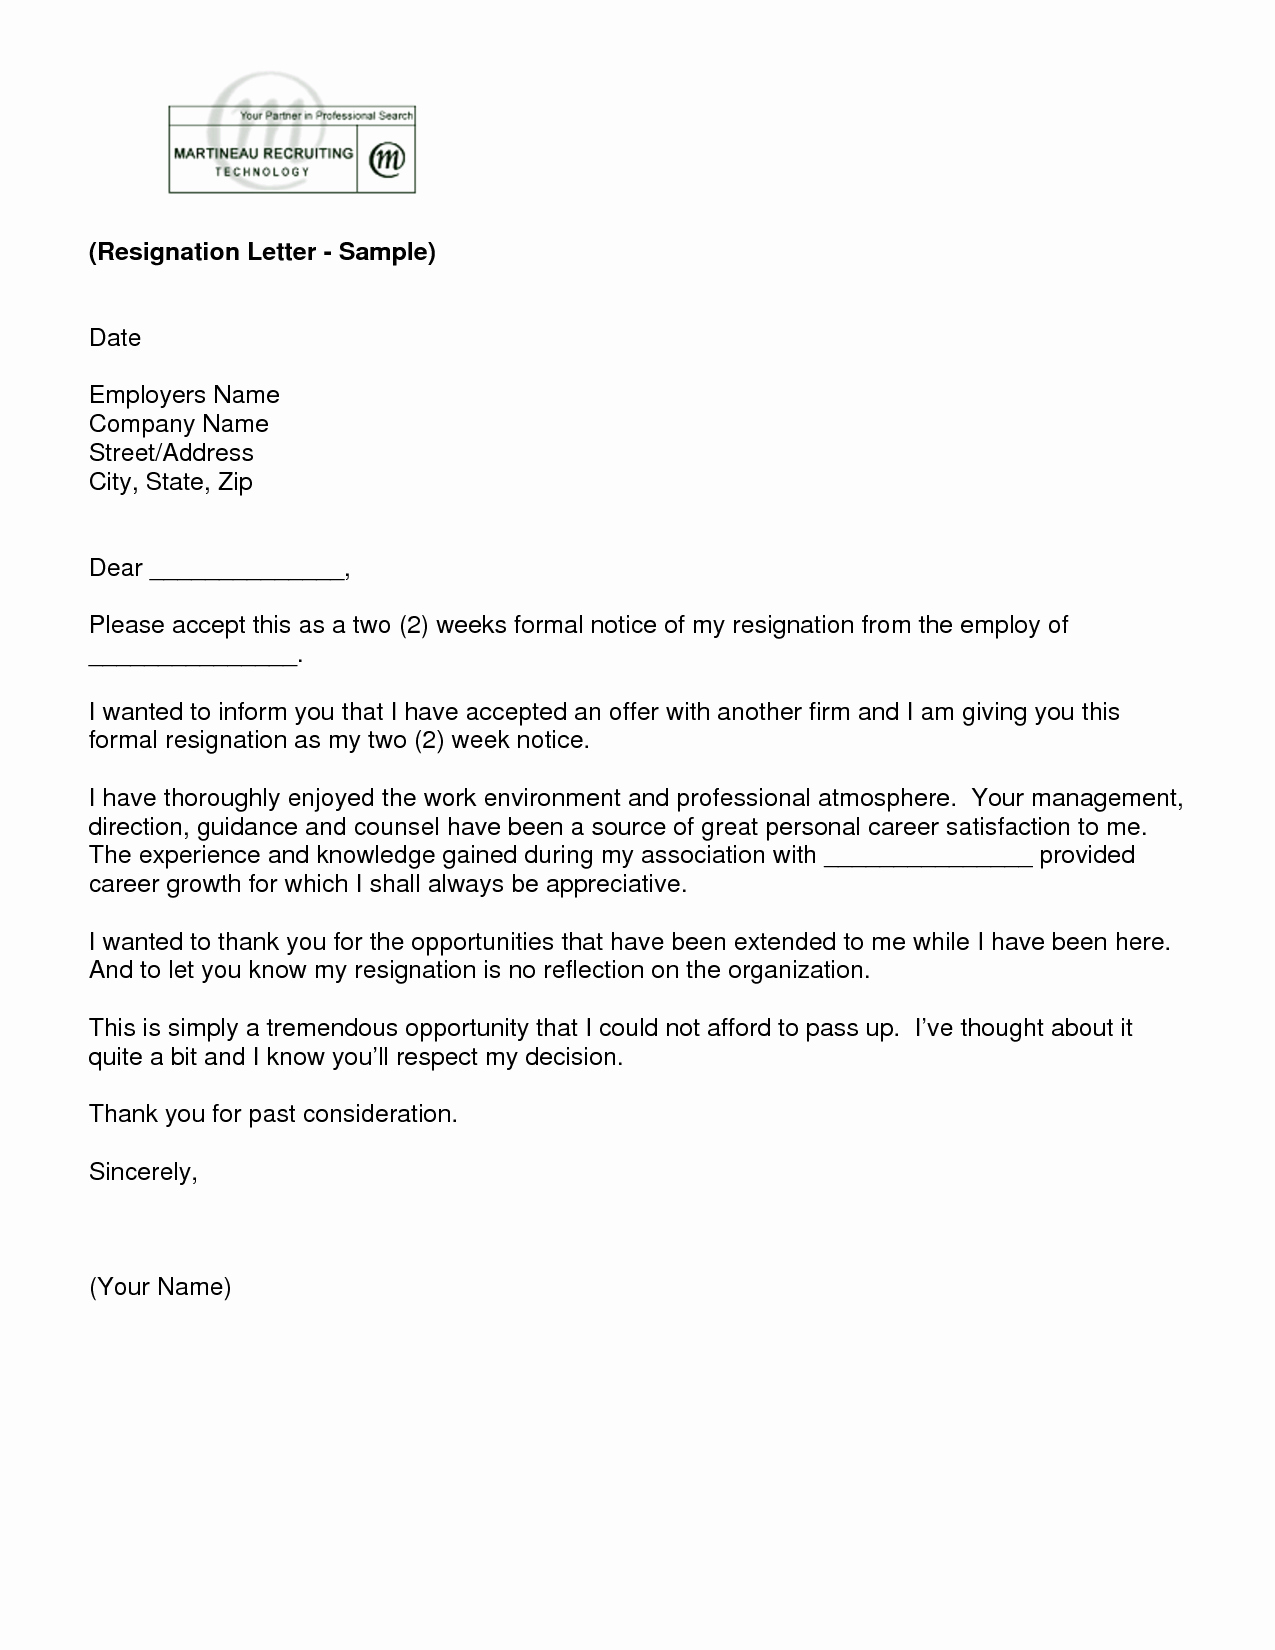 Resignation Letter Two Weeks Notice New Letter Of Resignation 2 Weeks Notice Template